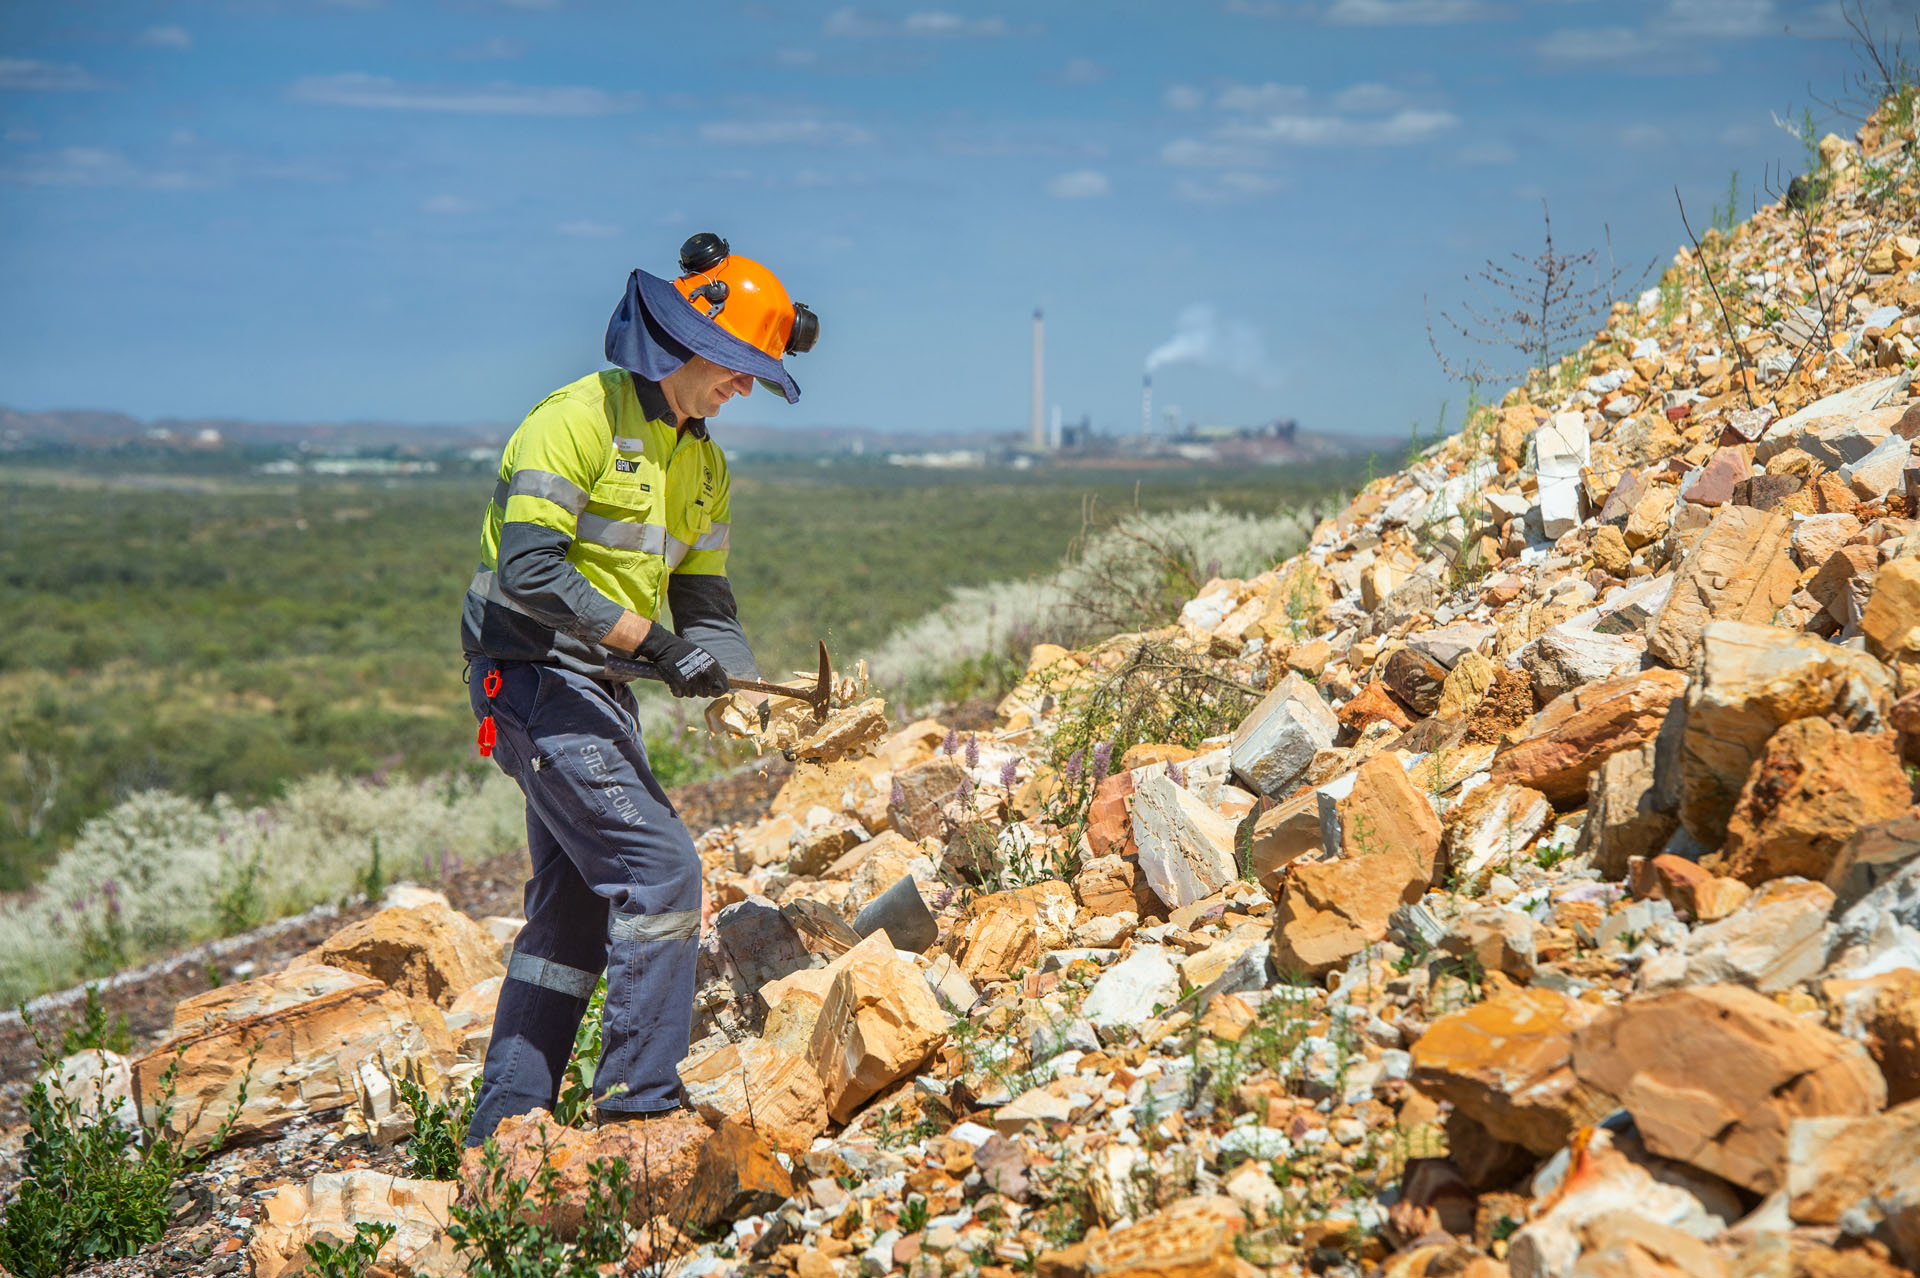 Photography of product, premises and personnel at Glencore's Mount Isa Mines, Mount Isa